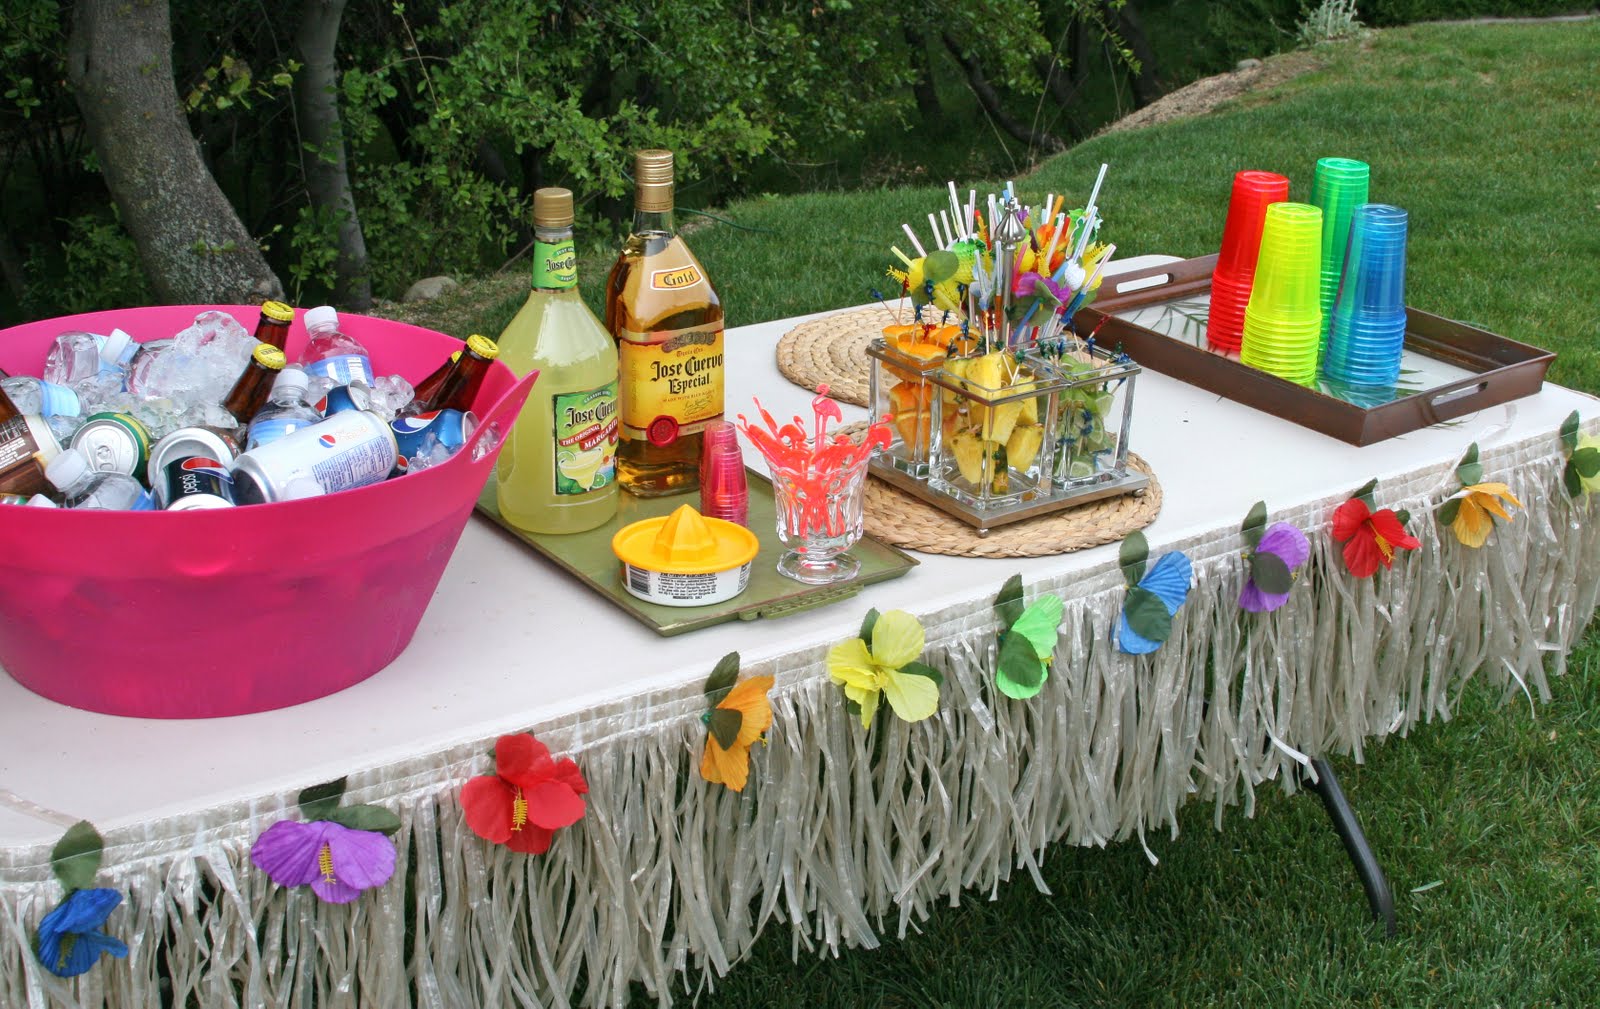 And what’s a luau without some fun drinks, and straws with umbrellas ...